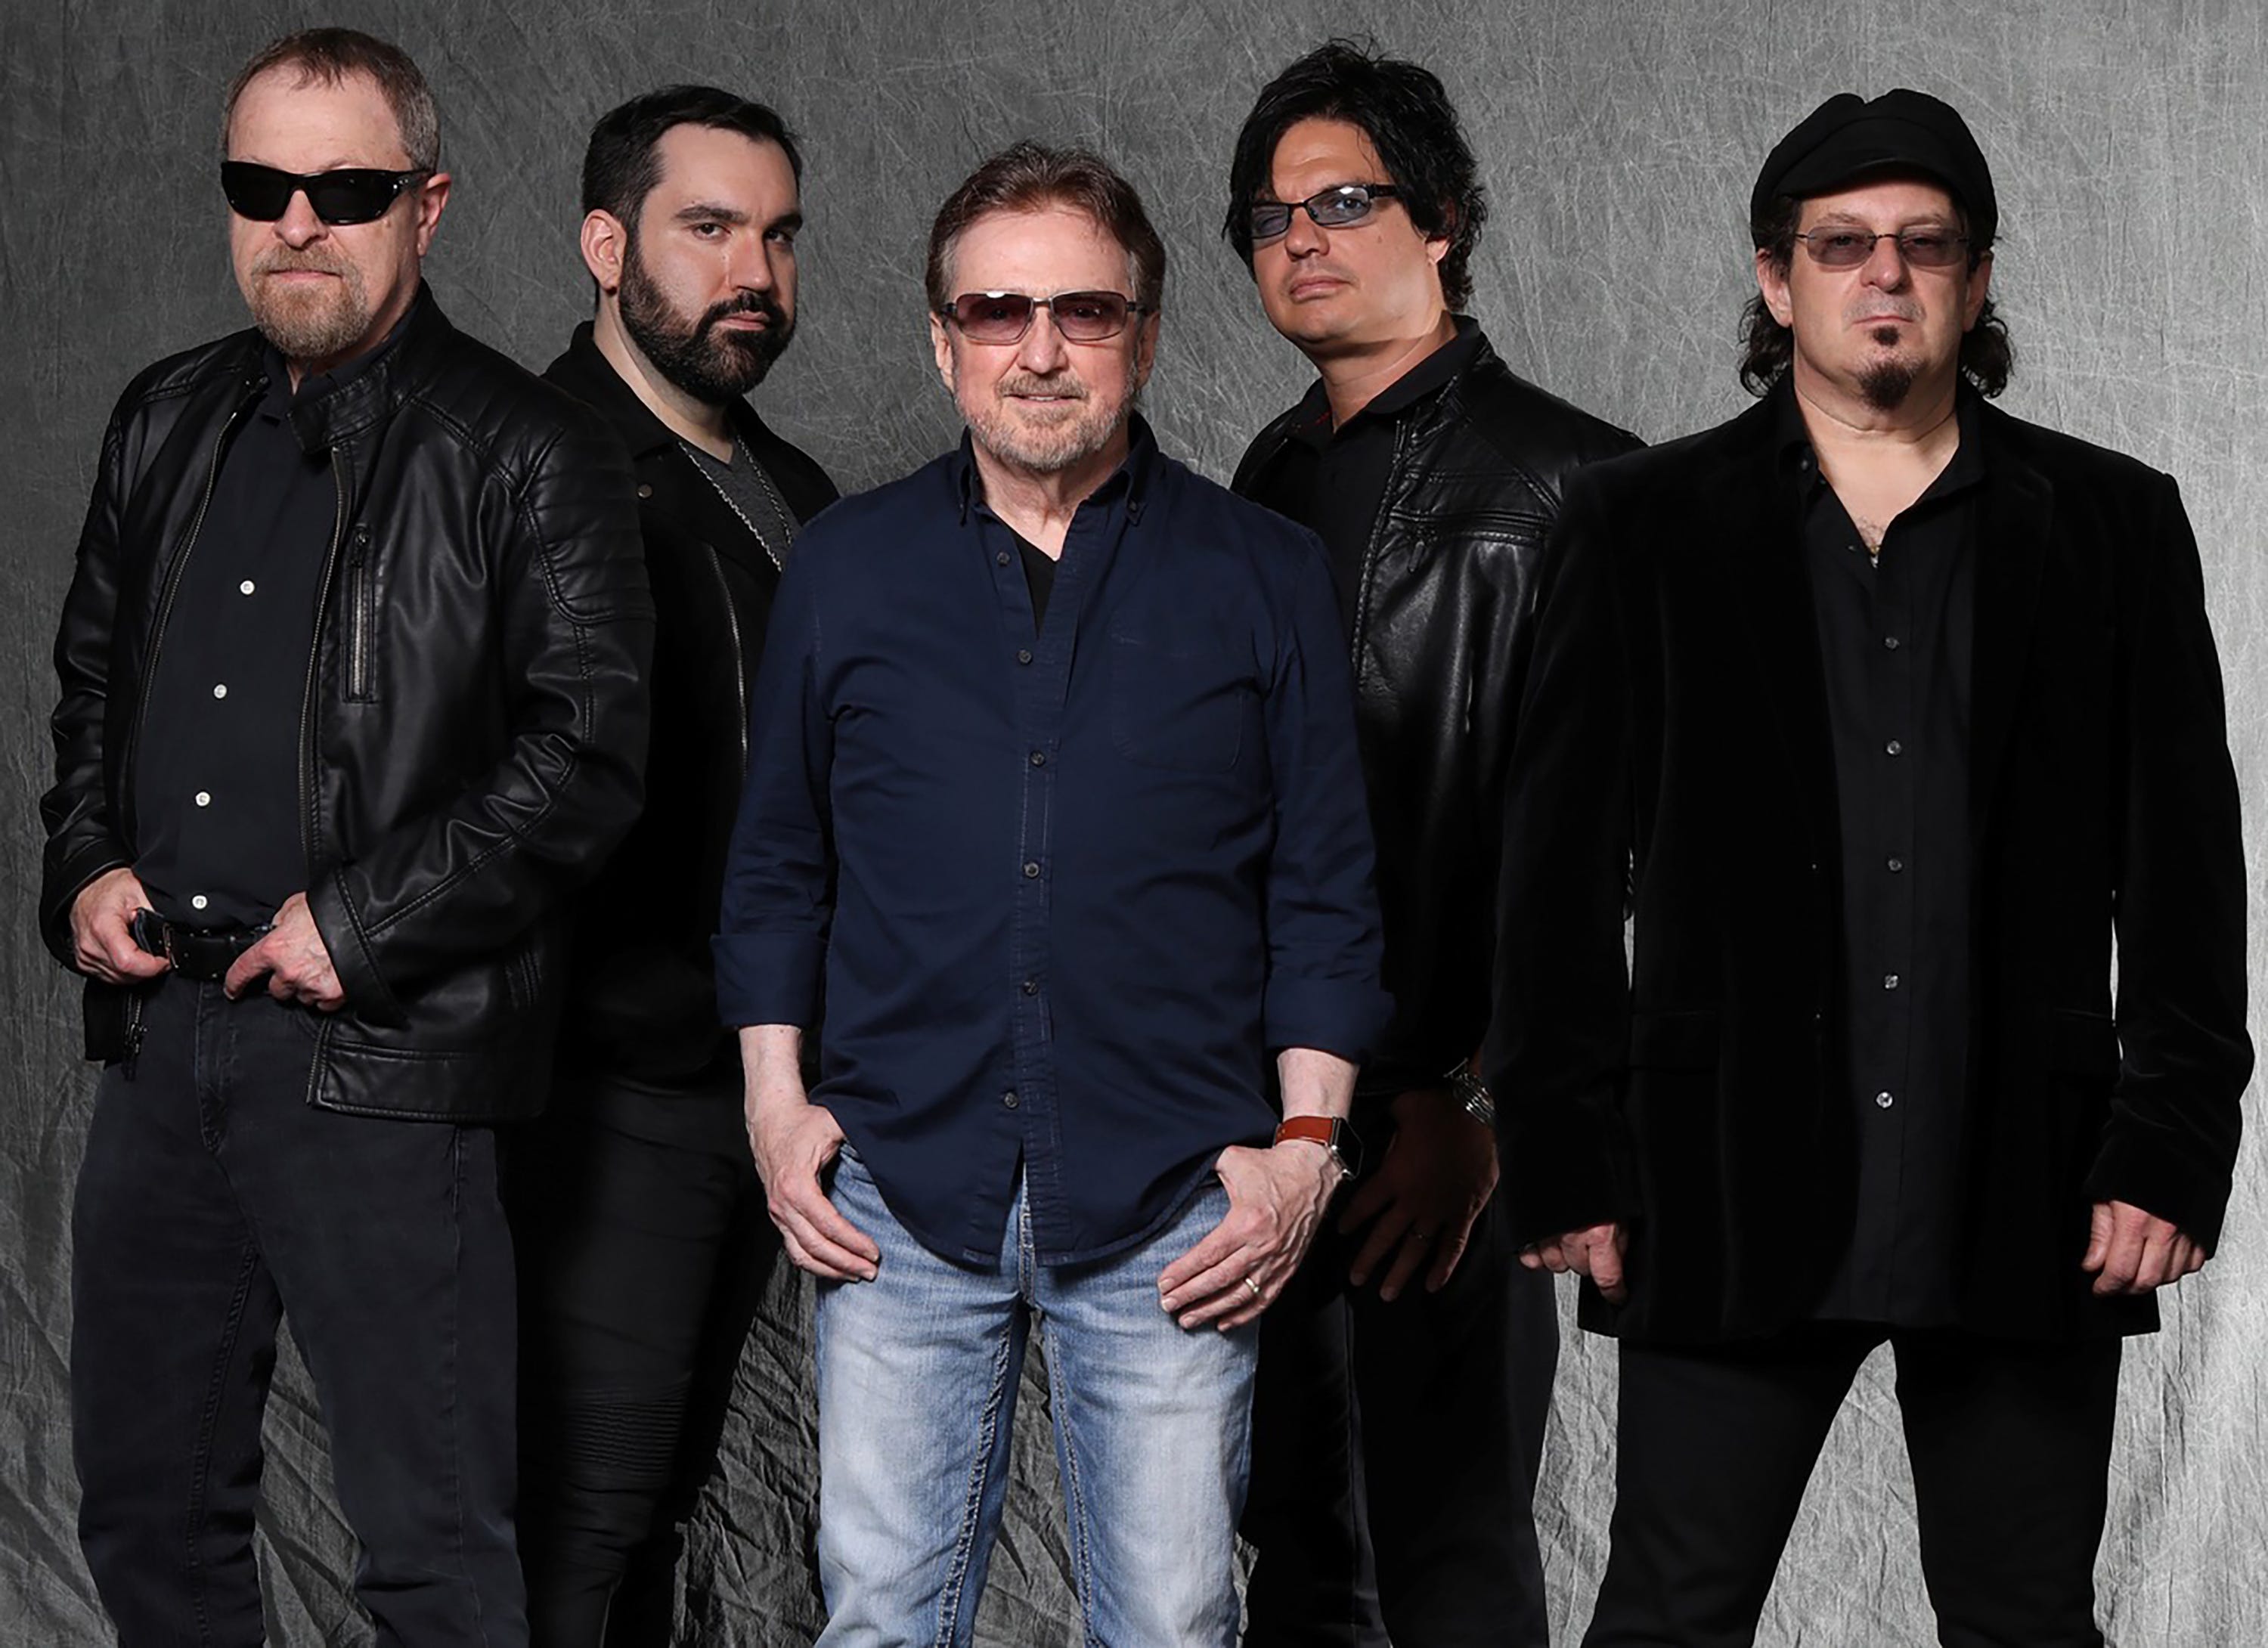 Blue Oyster Cult Comes Blasting Back On First Album In Nearly 20 Years